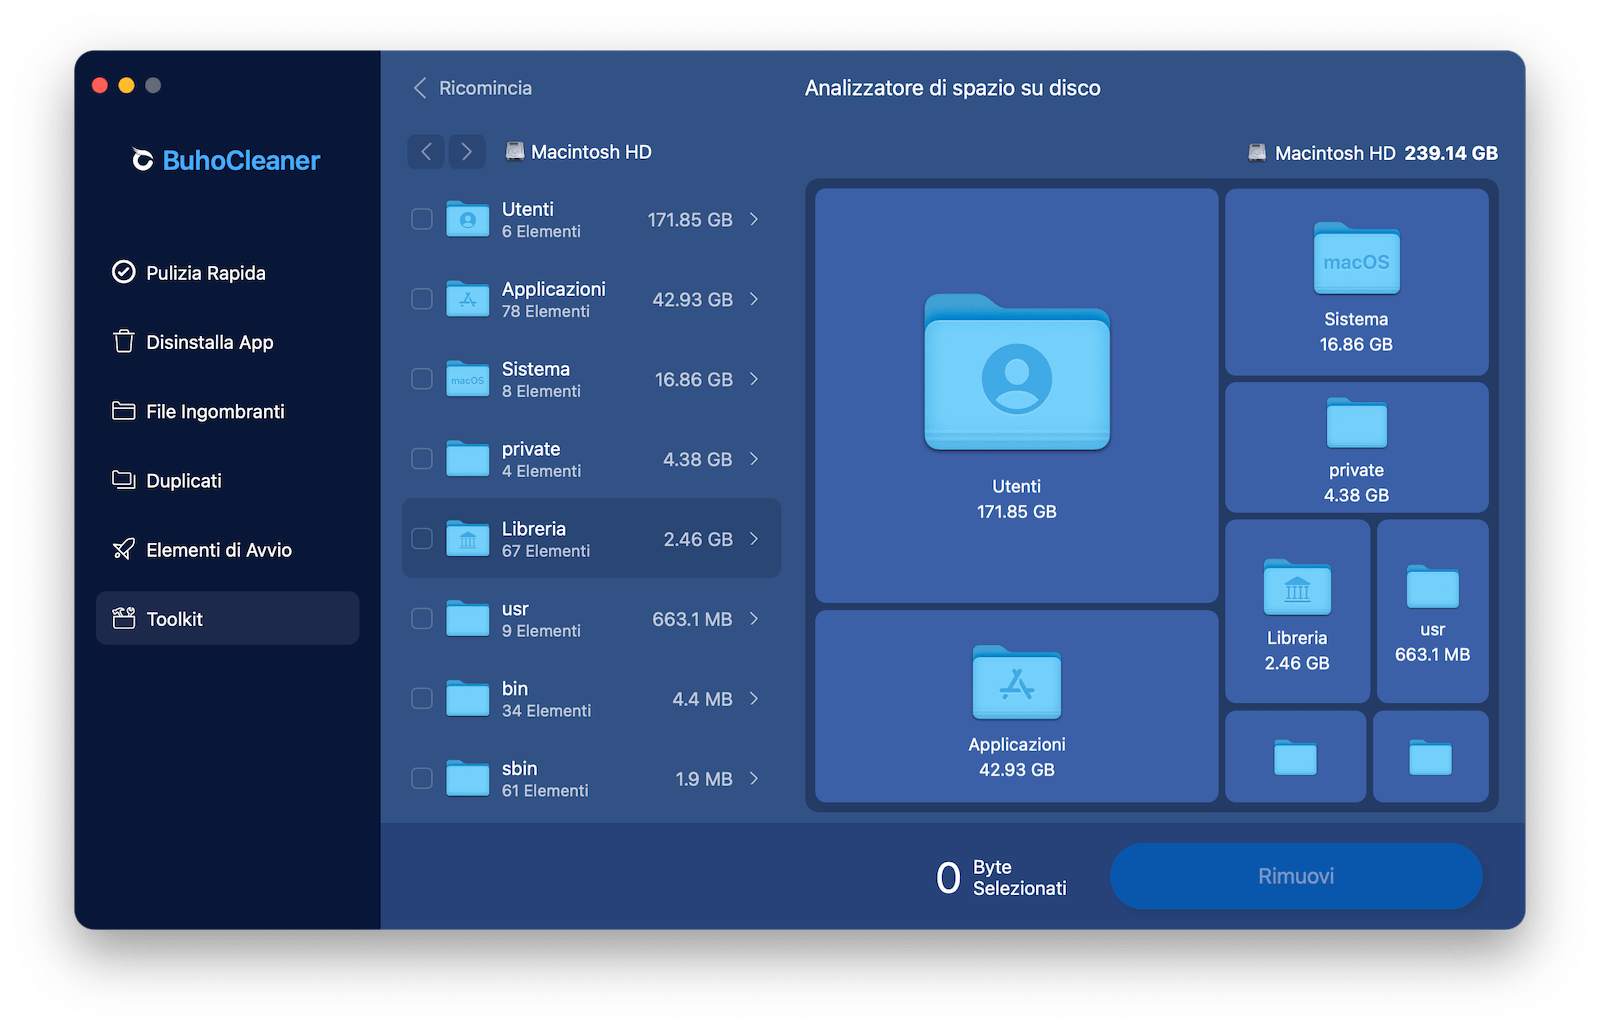 buhocleaner-disk-analyzer.png